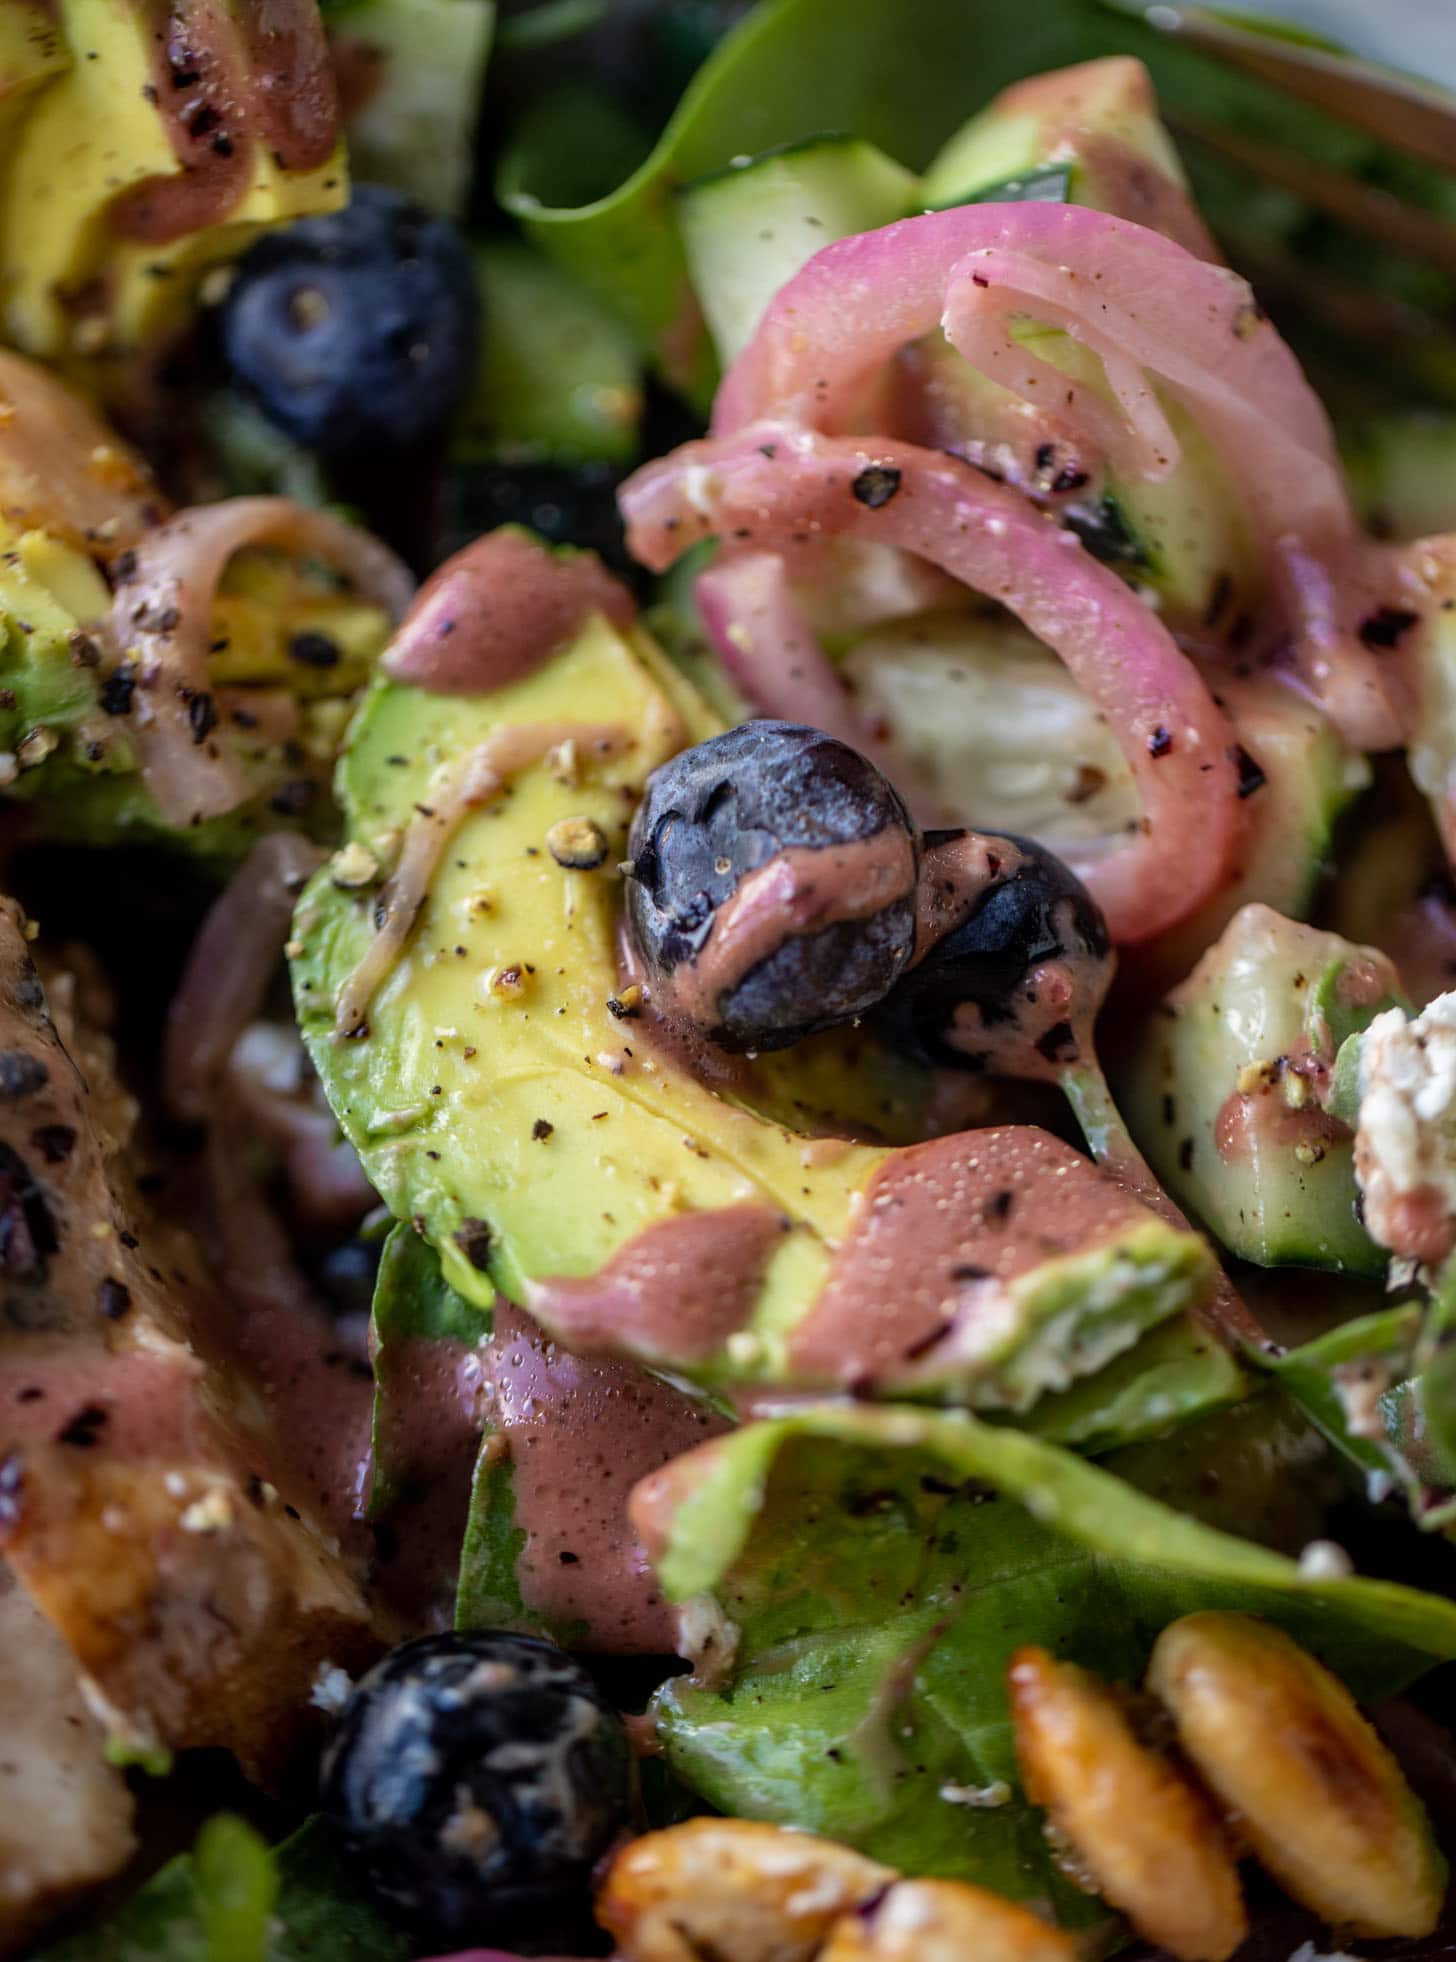 grilled chicken blueberry salad with blueberry vinaigrette